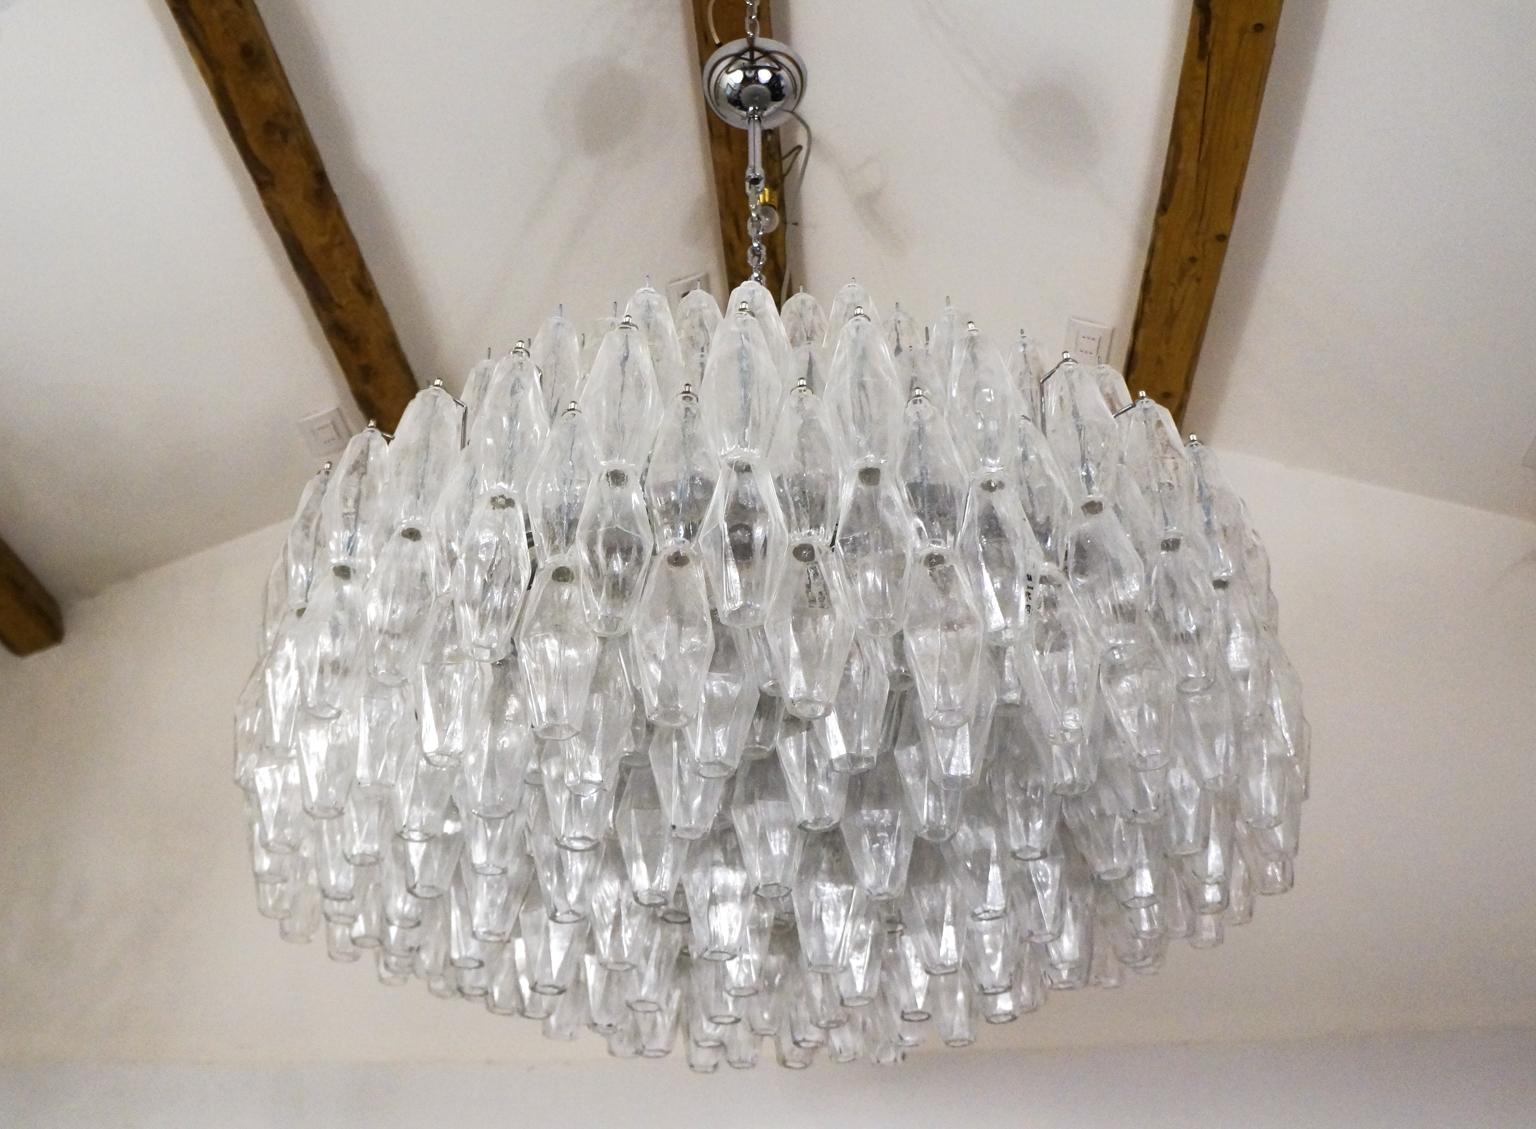 Large Murano blown glass Poliedri chandelier with crystal color elements. This fantastic chandelier contains a total of 680 elements called Poliedri.
This Classic developed in the 60s and then reproduced by Maestro Alberto Donà in different shapes